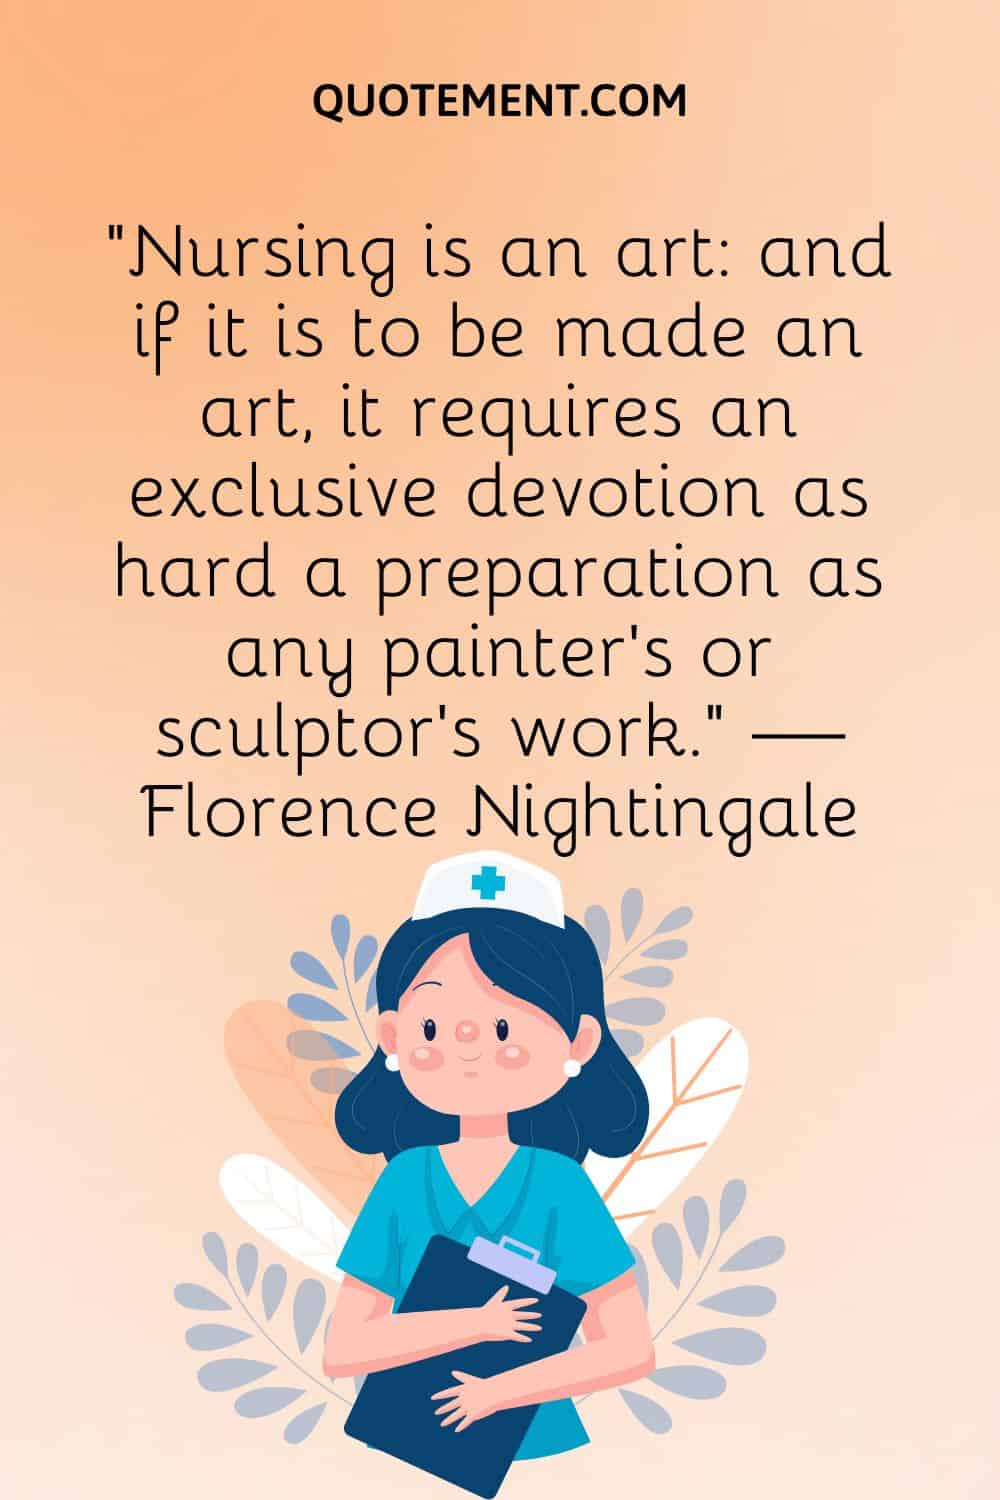 “Nursing is an art and if it is to be made an art, it requires an exclusive devotion as hard a preparation as any painter's or sculptor's work.” — Florence Nightingale